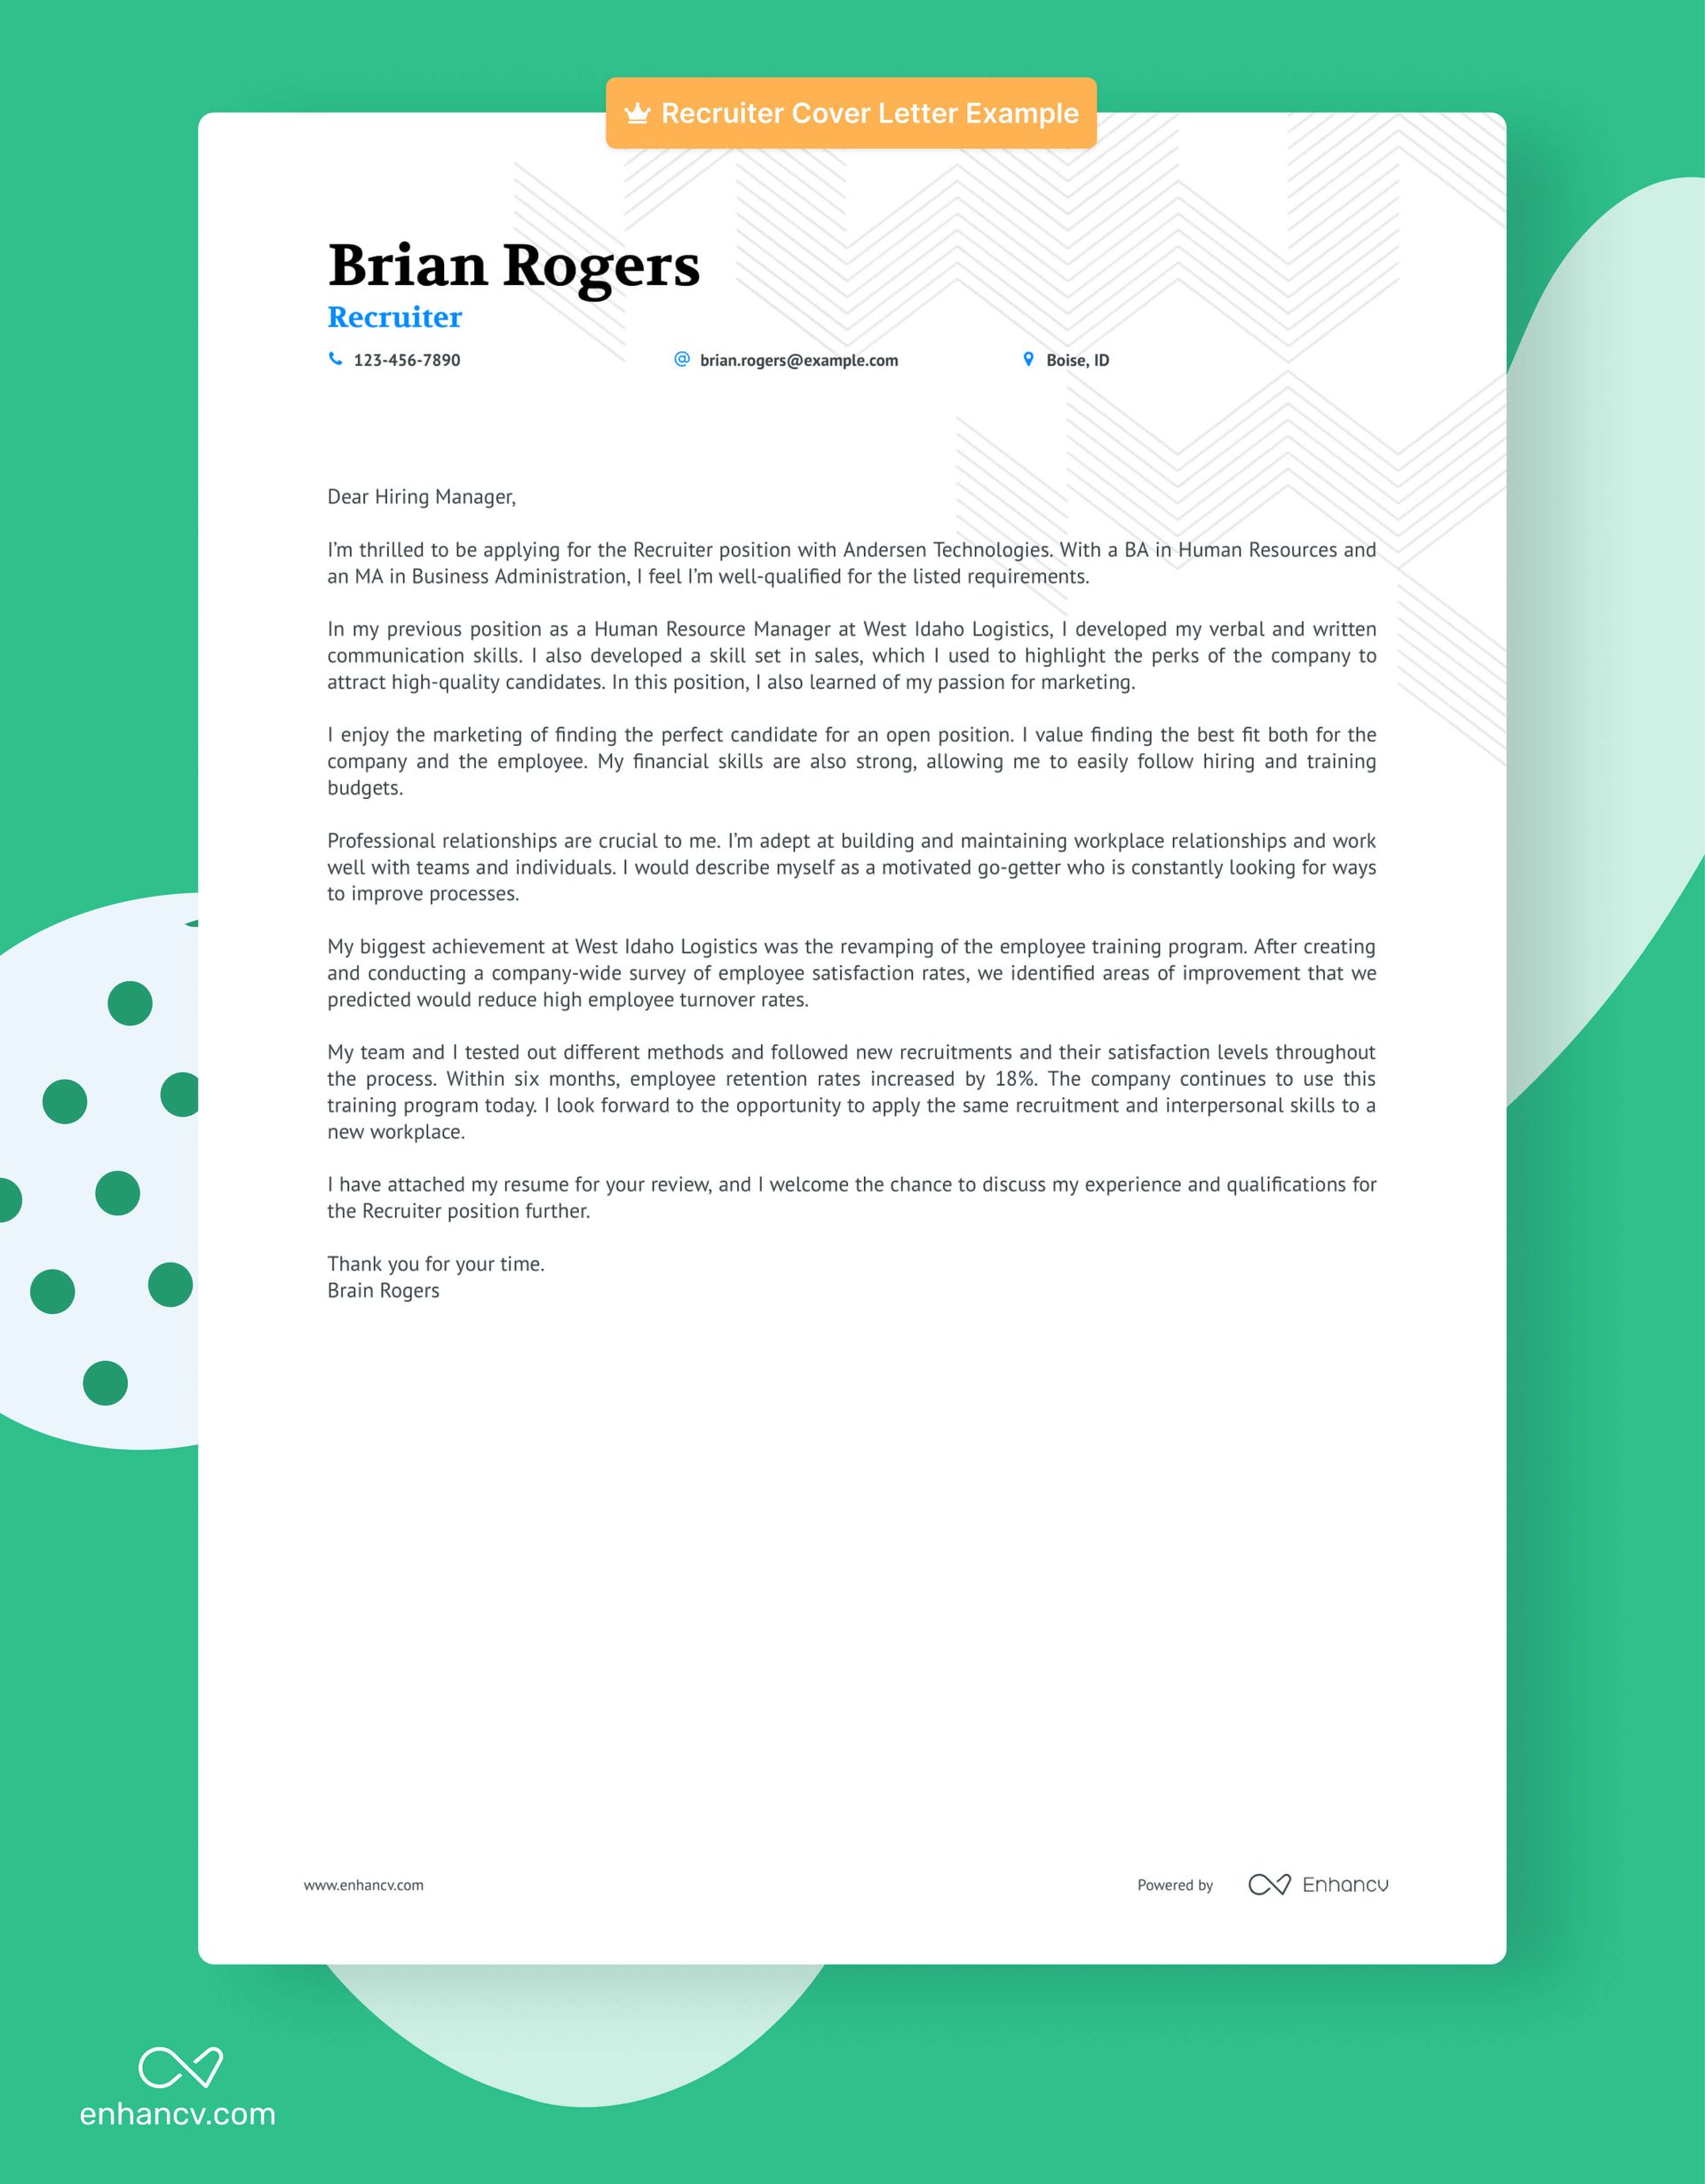 A cover letter example for a recruiter position build with the Enhancv cover letter builder.